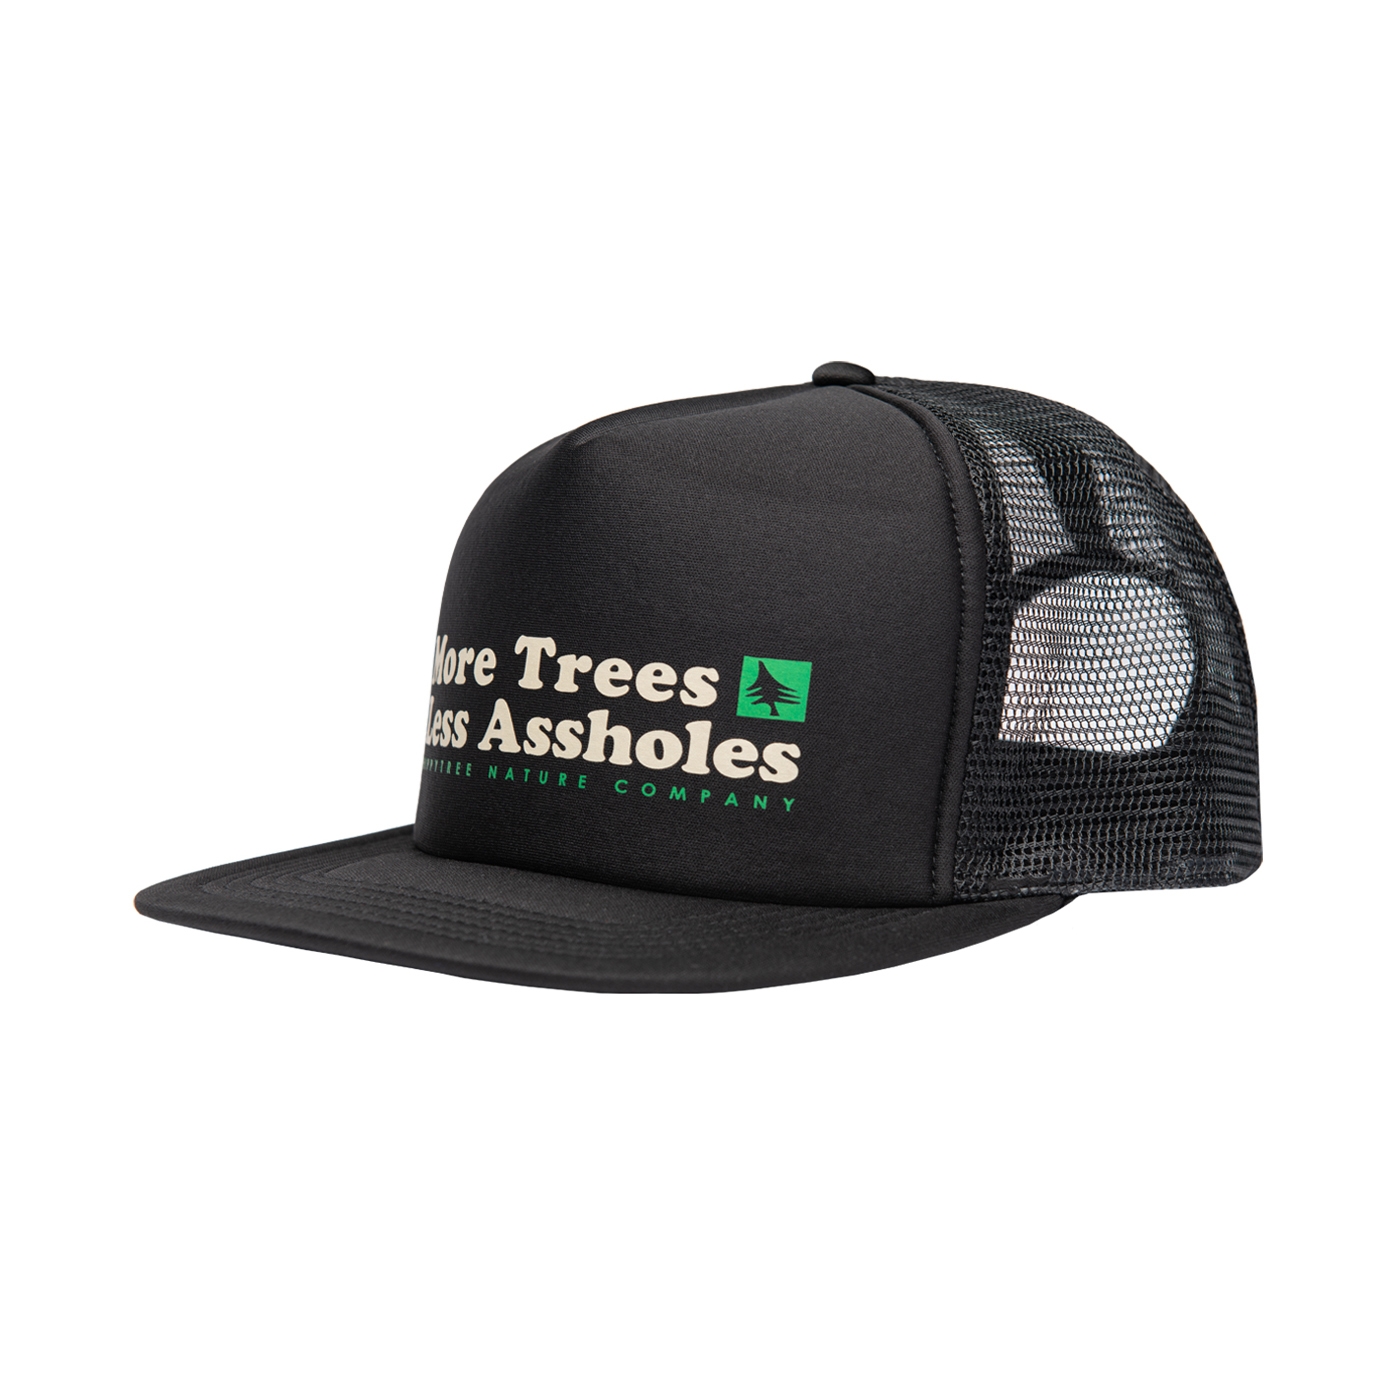 More Trees Hat